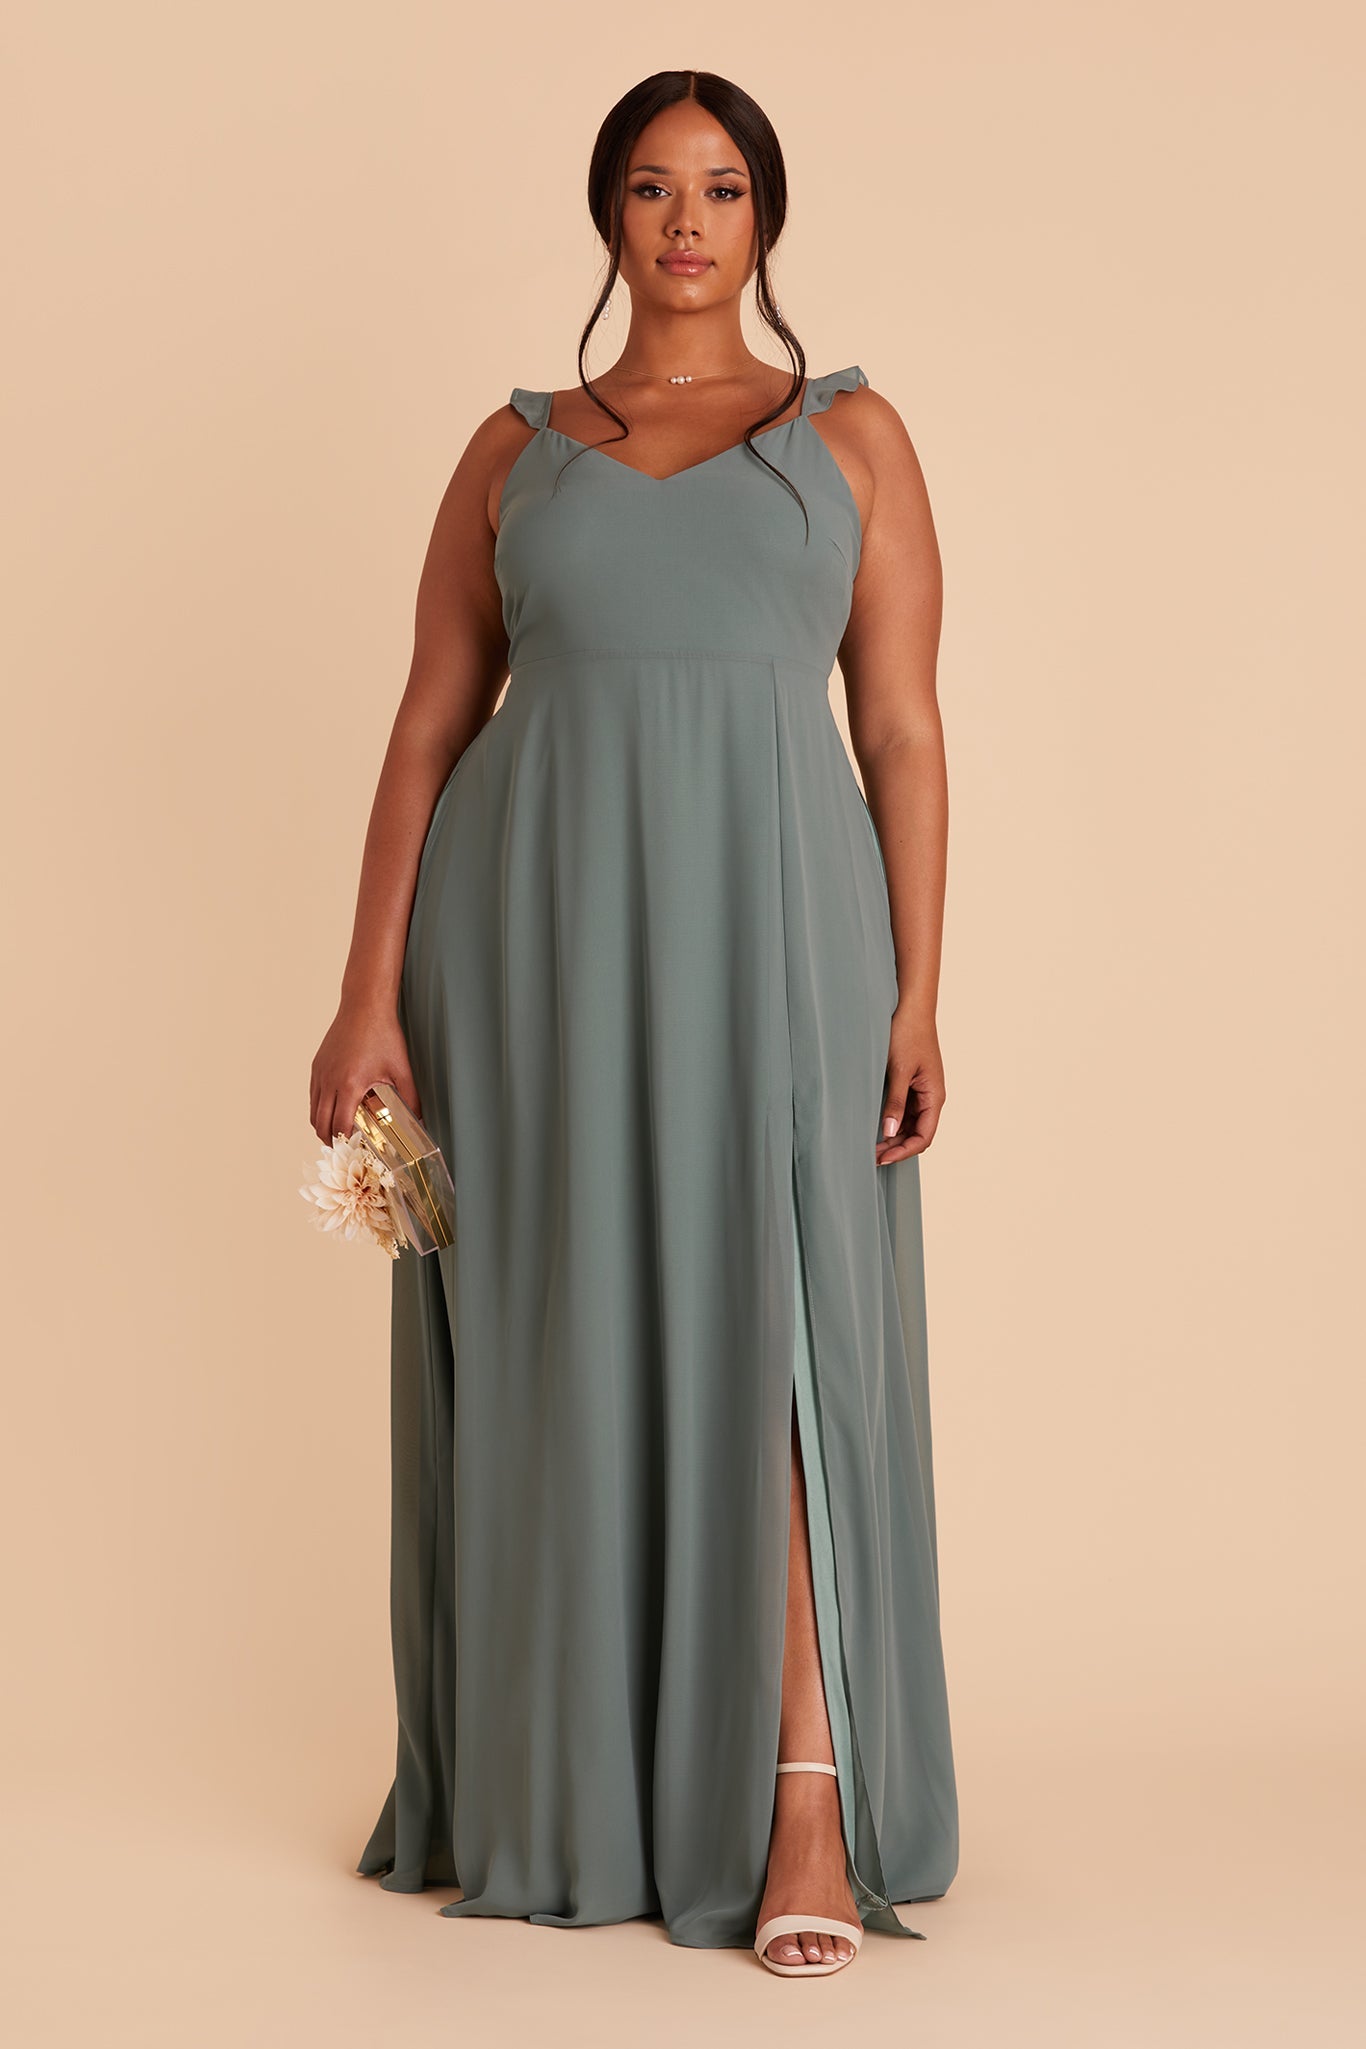 Doris plus size bridesmaid dress with slit in sea glass chiffon by Birdy Grey, front view